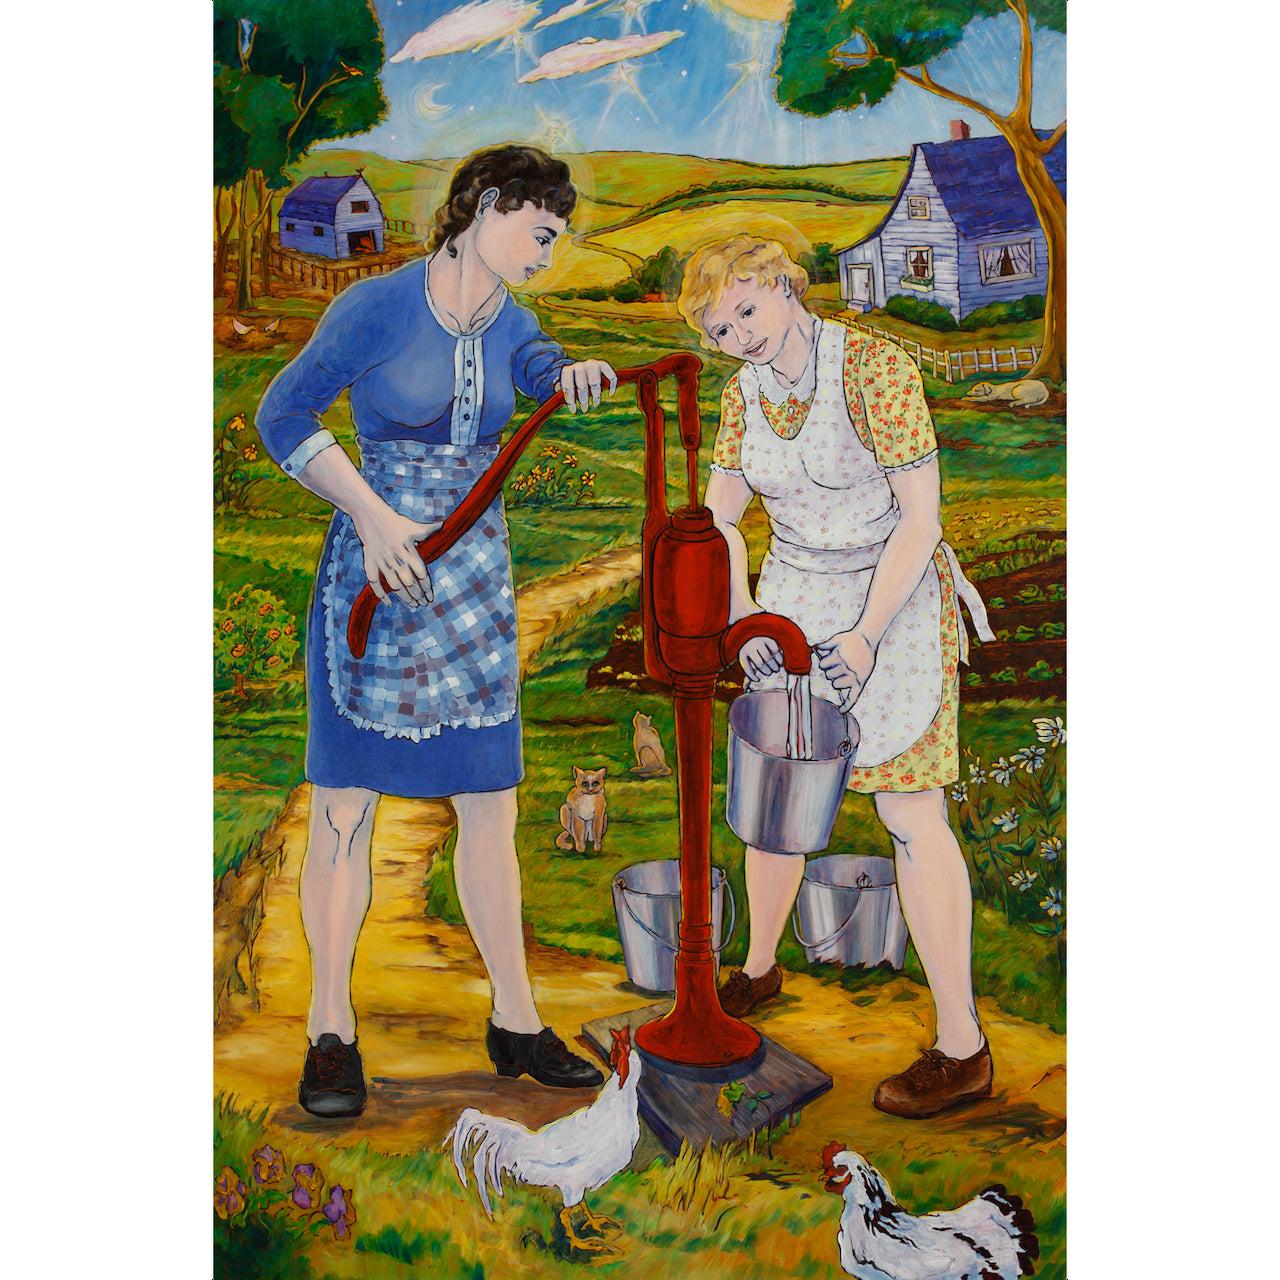 "Women at the Well", by Marilyn Wells, prints of original oil painting  